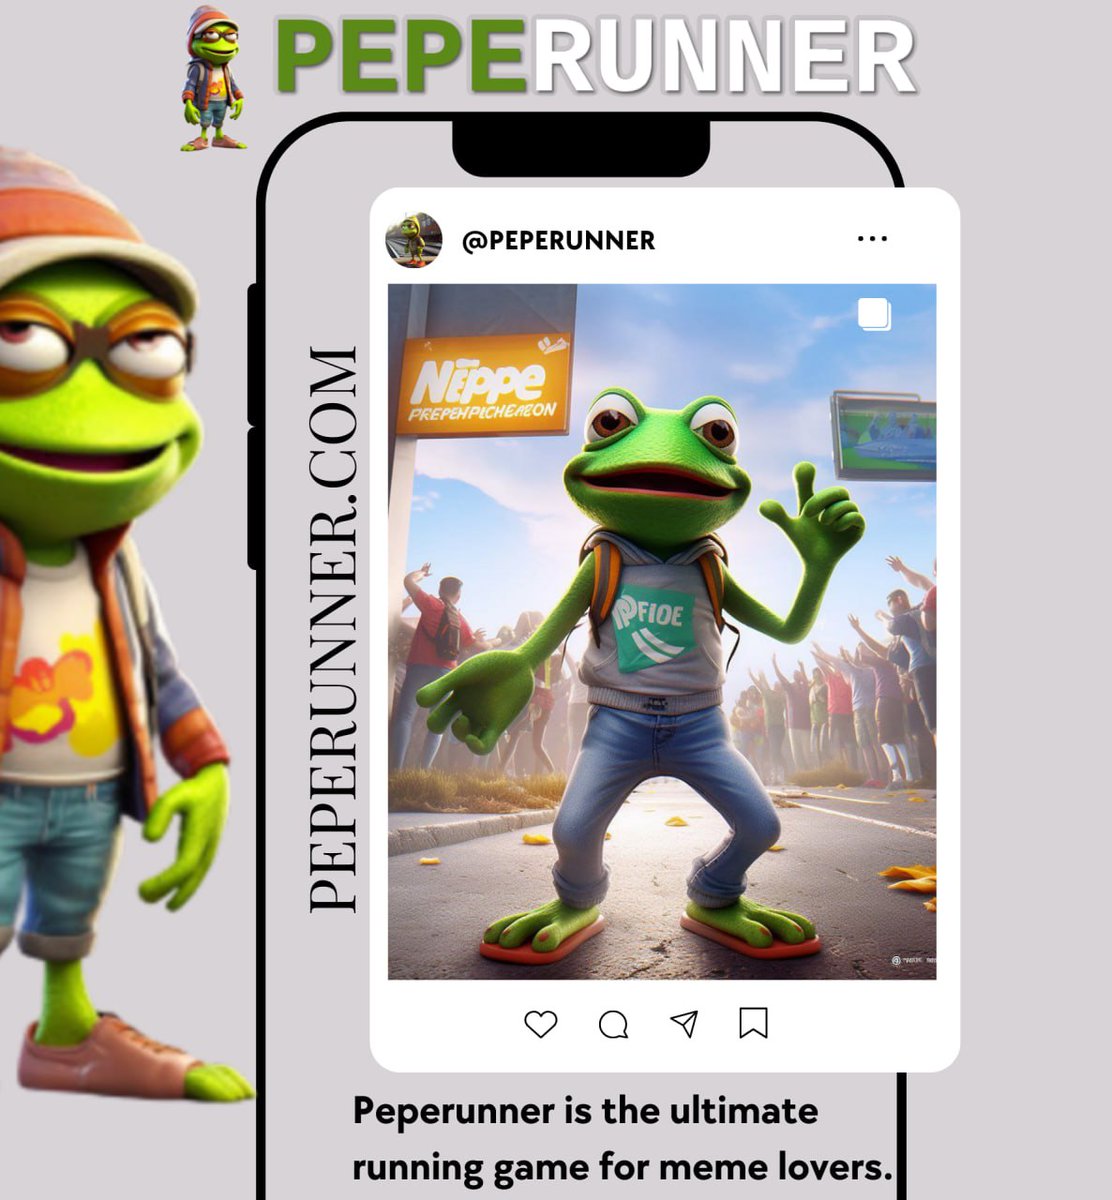 Are you a Meme lover? Then PEPERUNNER is the ultimate game for you, check out our website at peperunner.com for more information on the game and token!

#PEPE $PEPERUNNER

@peperunner 

#EMArmy #PepeWarriors #PlayToEarn #HopToVictory